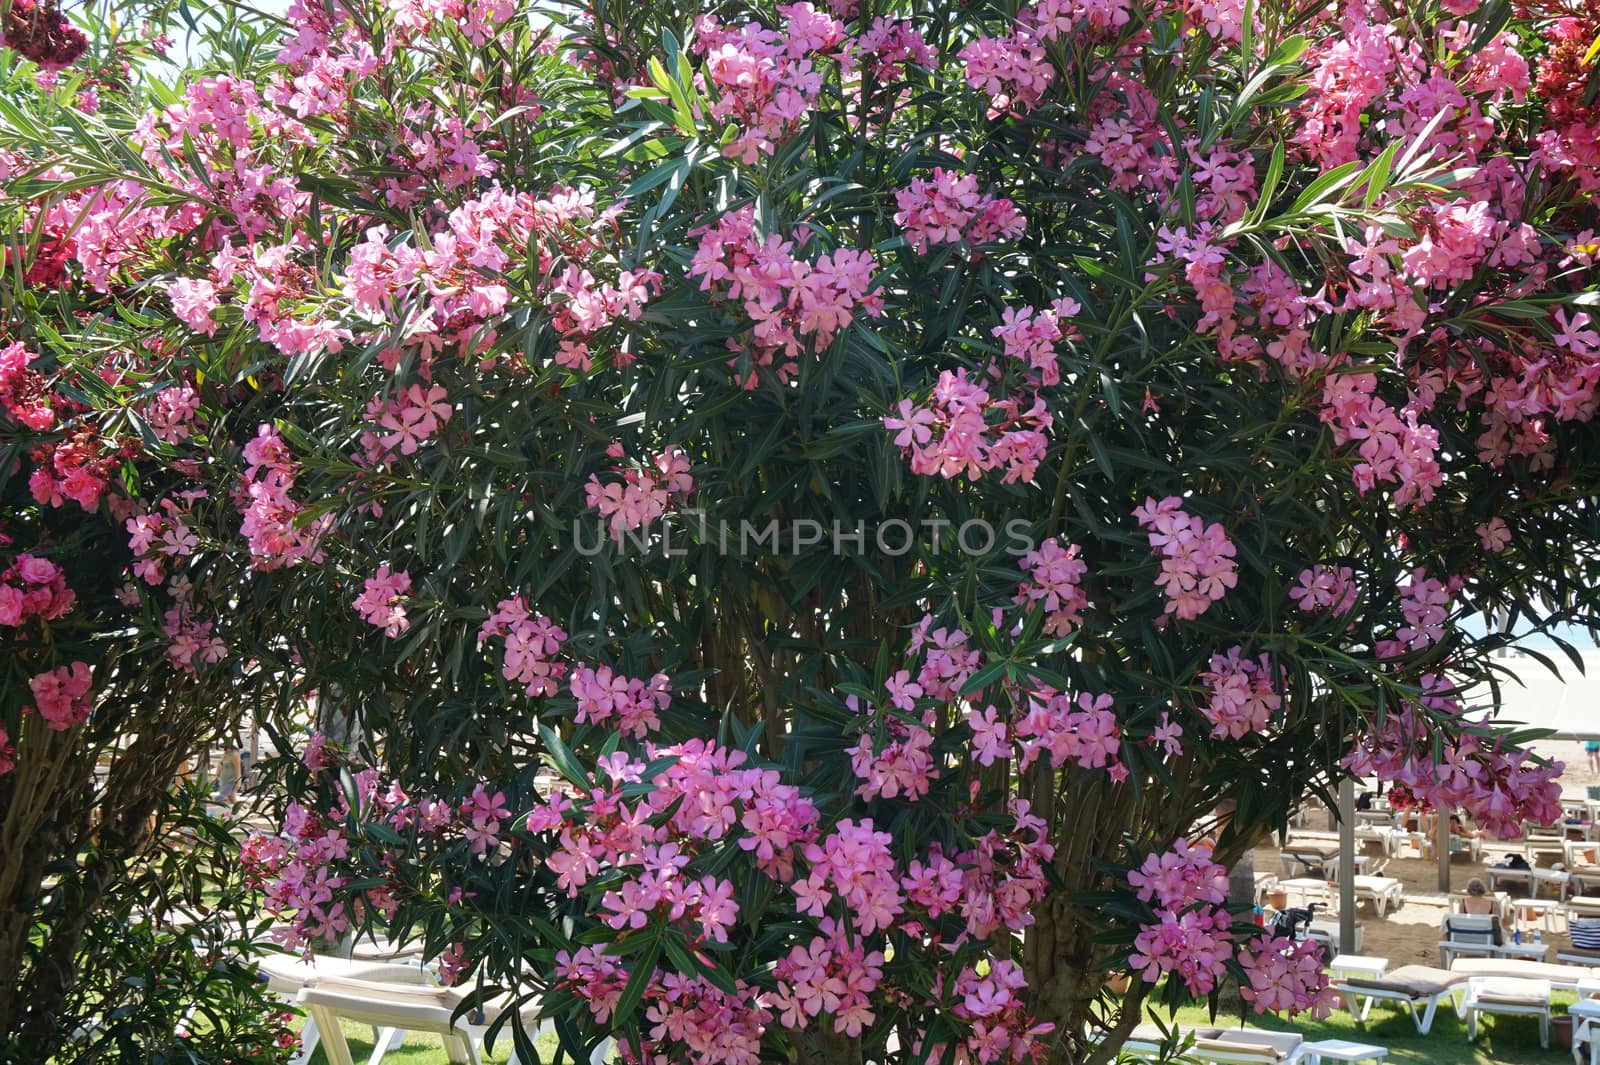 oleander shrub with pink flowers, beautiful floral background.